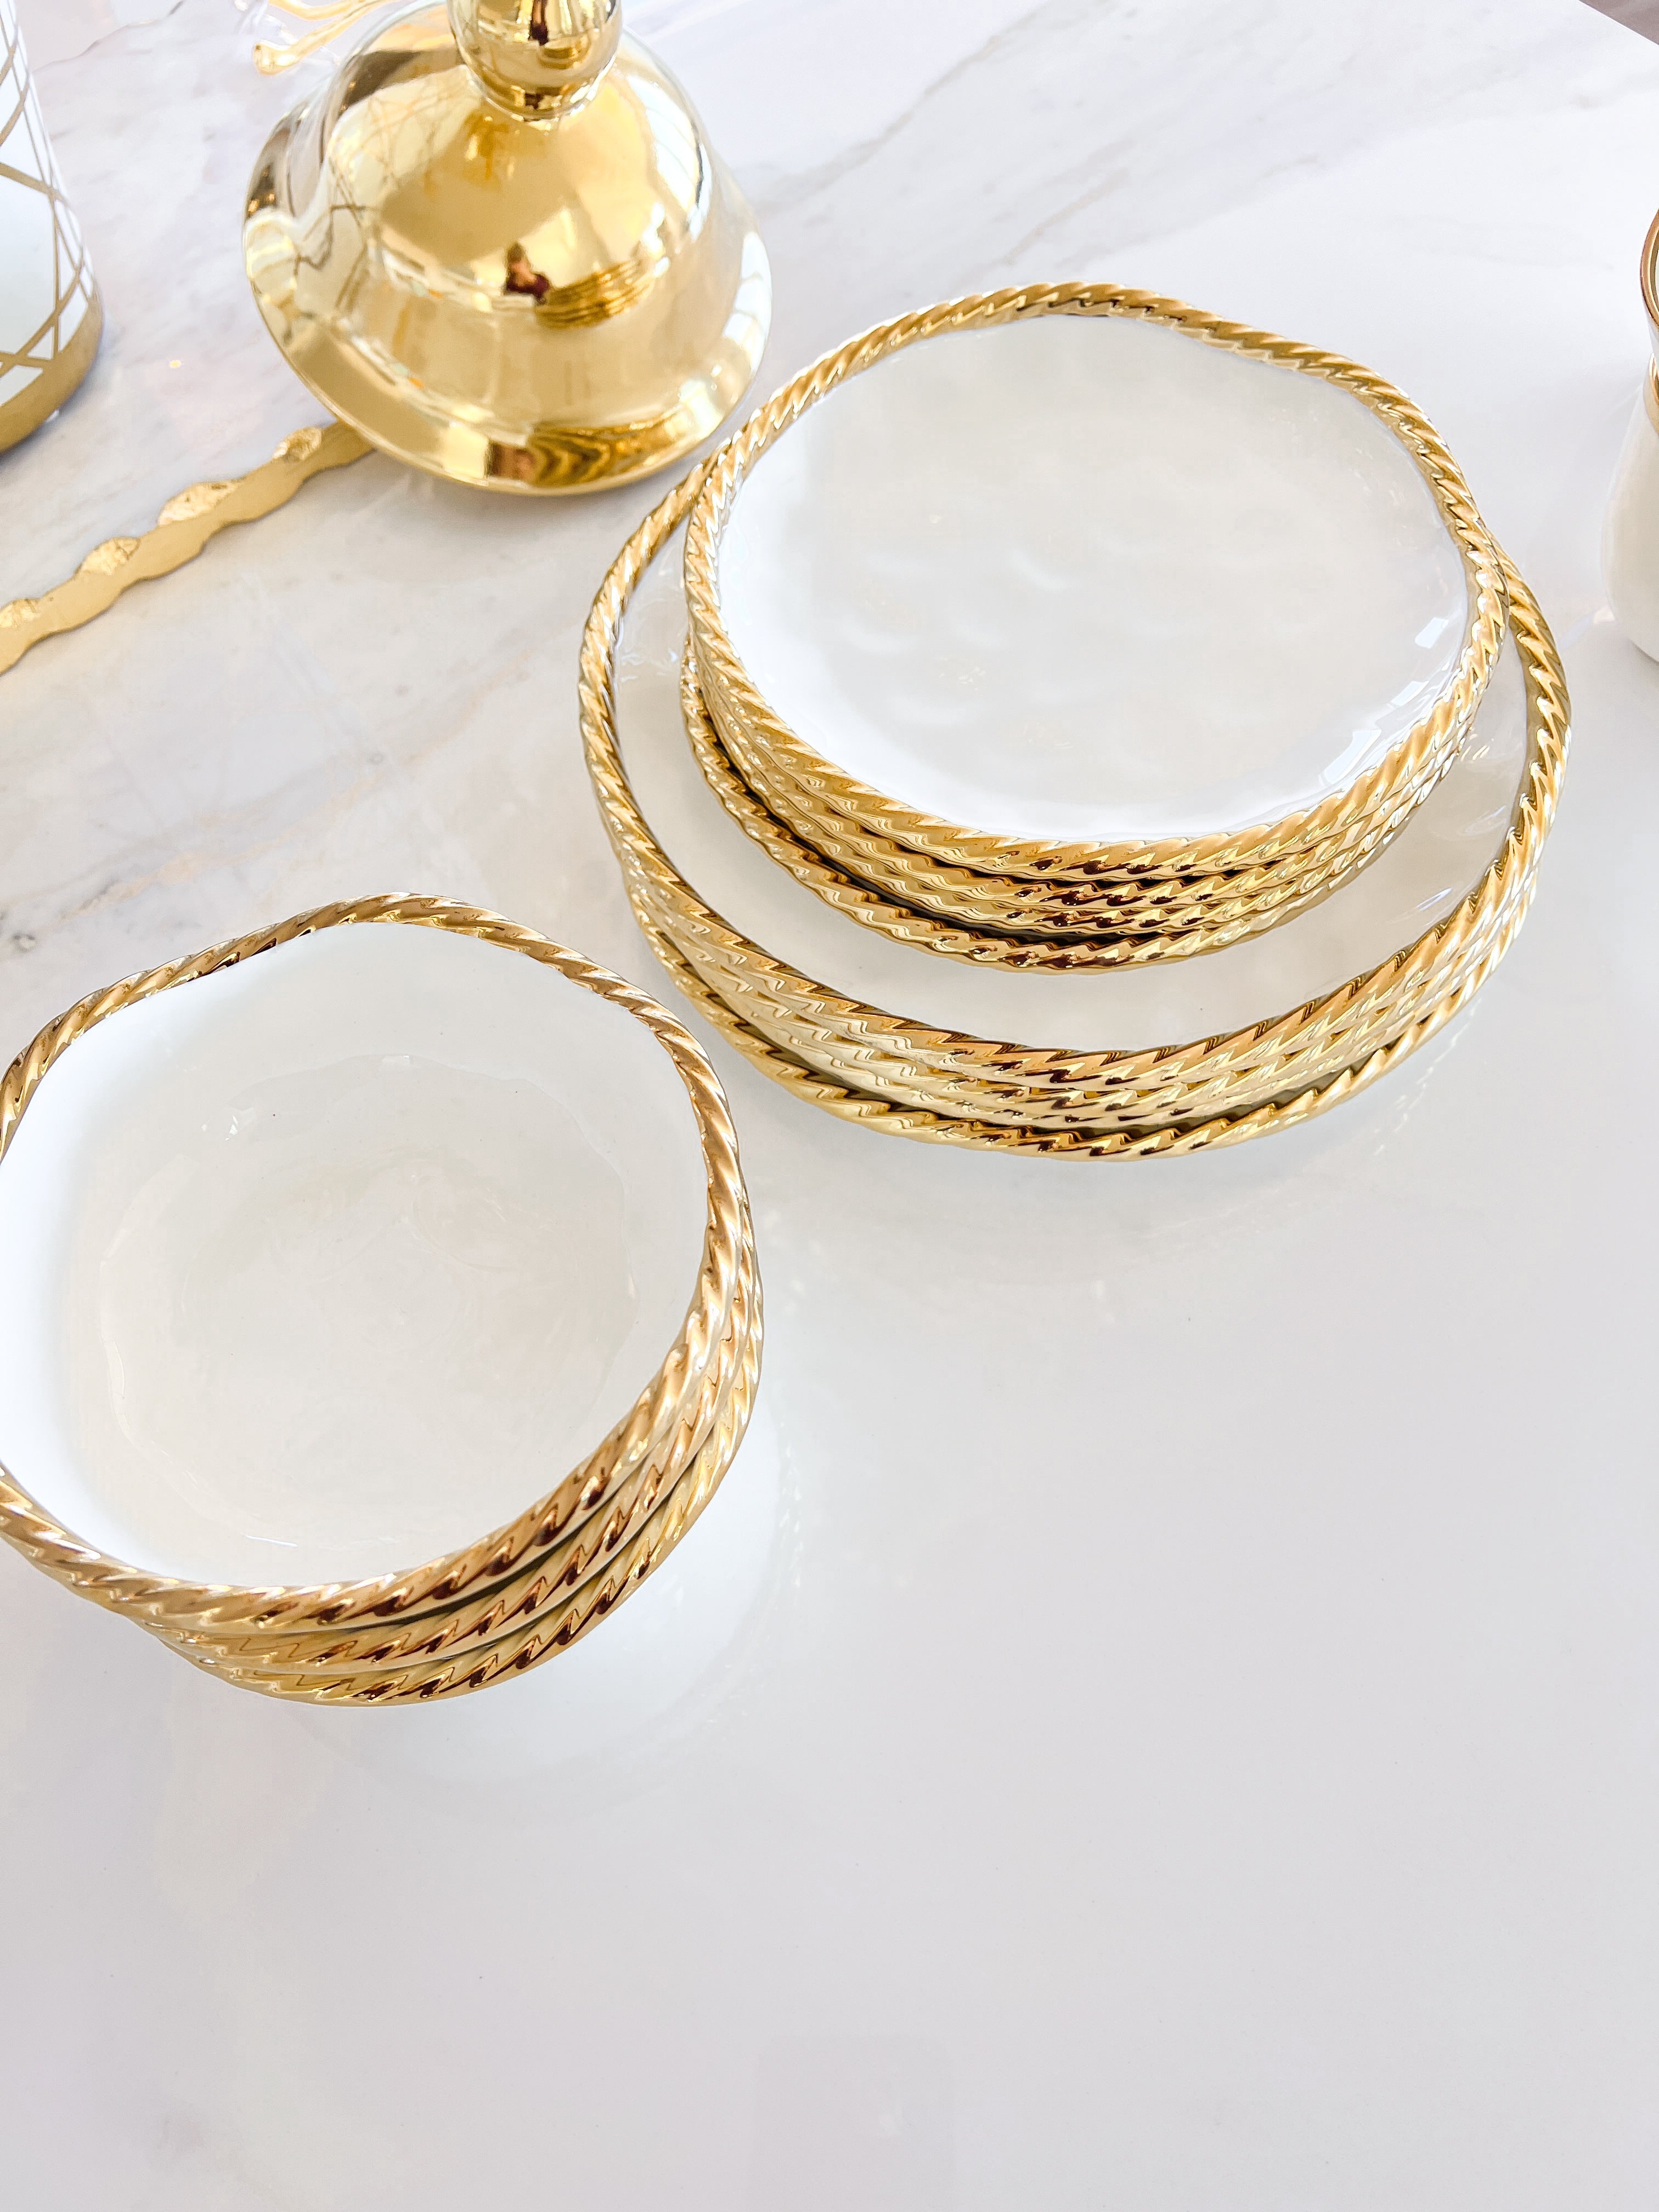 Gold Twisted Rope Salad Plate (Set of 4) - HTS HOME DECOR